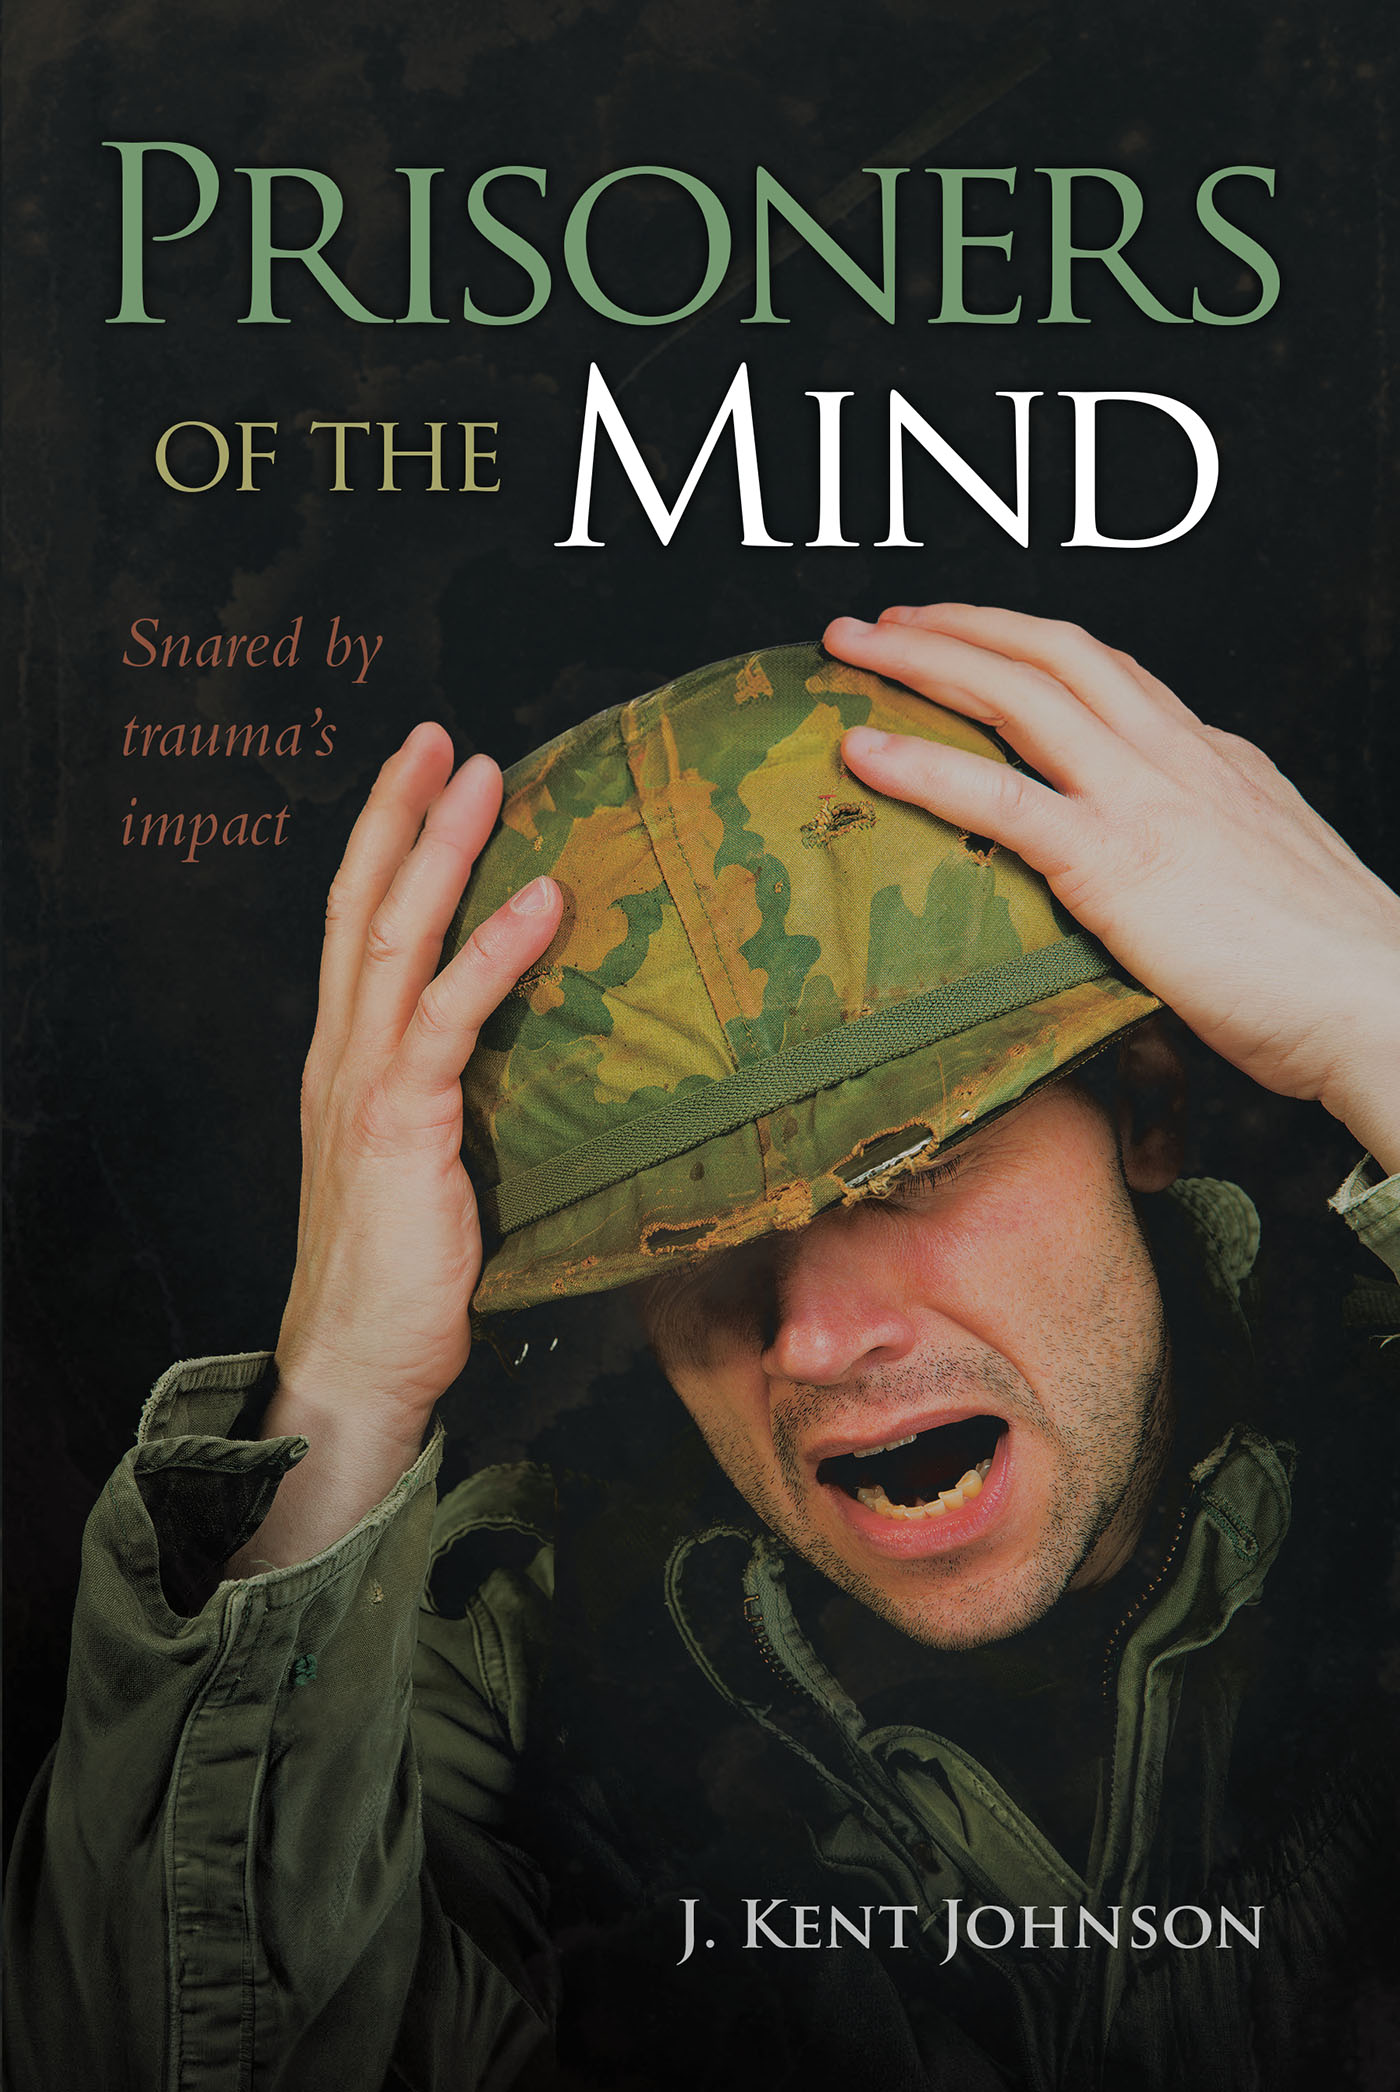 Author J. Kent Johnson’s New Book, "Prisoners of the Mind," is the Powerful Story of Two Veterans Struggling to Overcome the Trauma They Experienced Serving in WWII